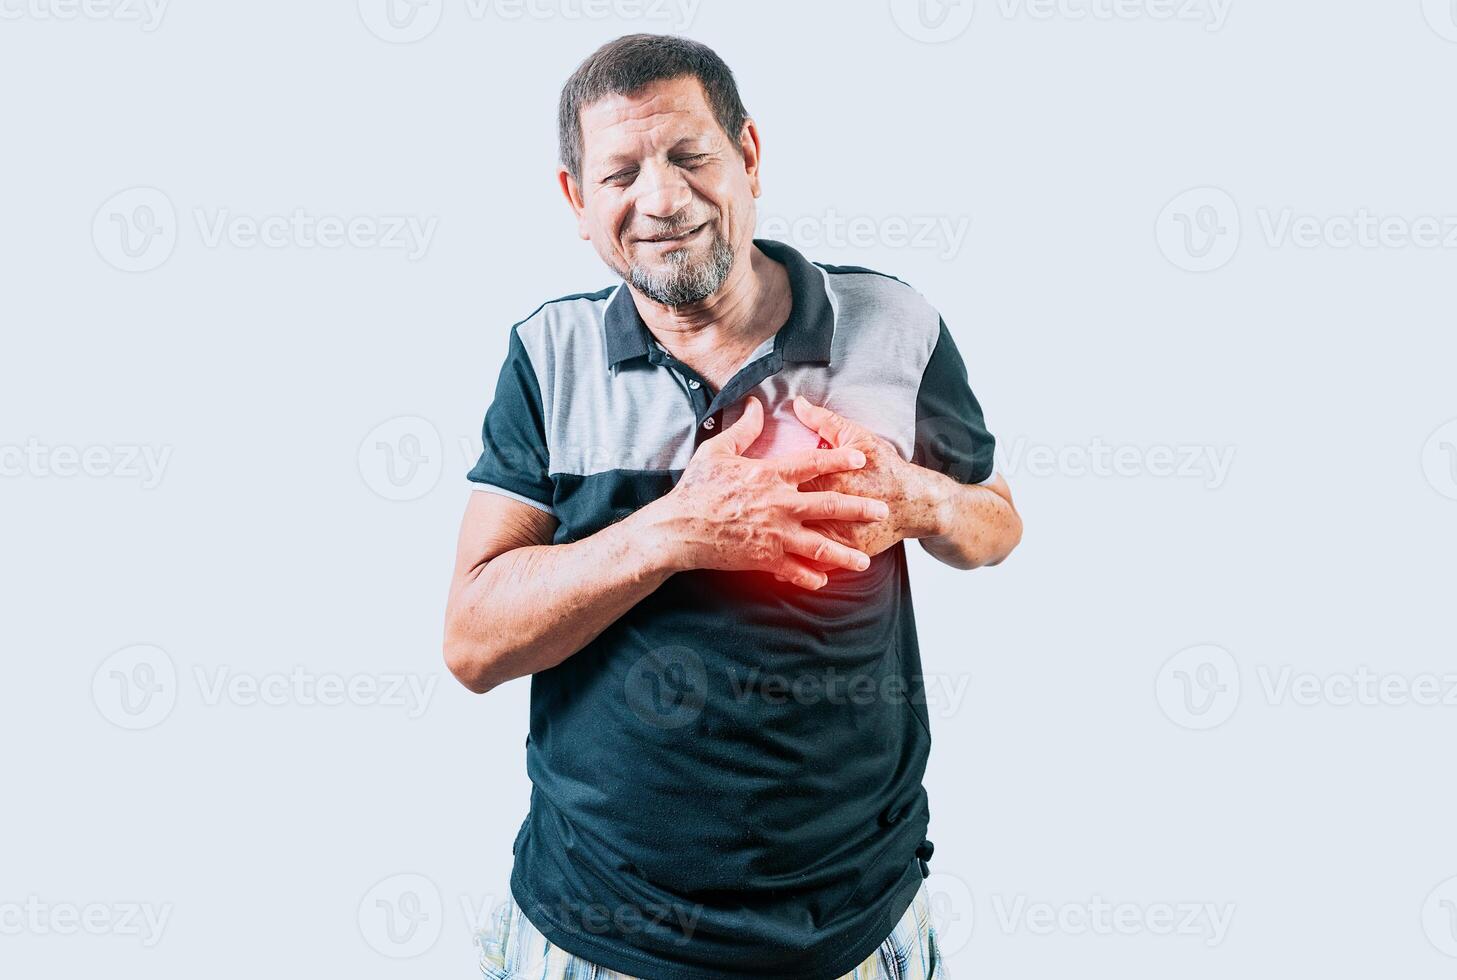 Elderly person with heart problems. Senior man with tachycardia touching his chest. Old man with heart pain touching chest isolated photo